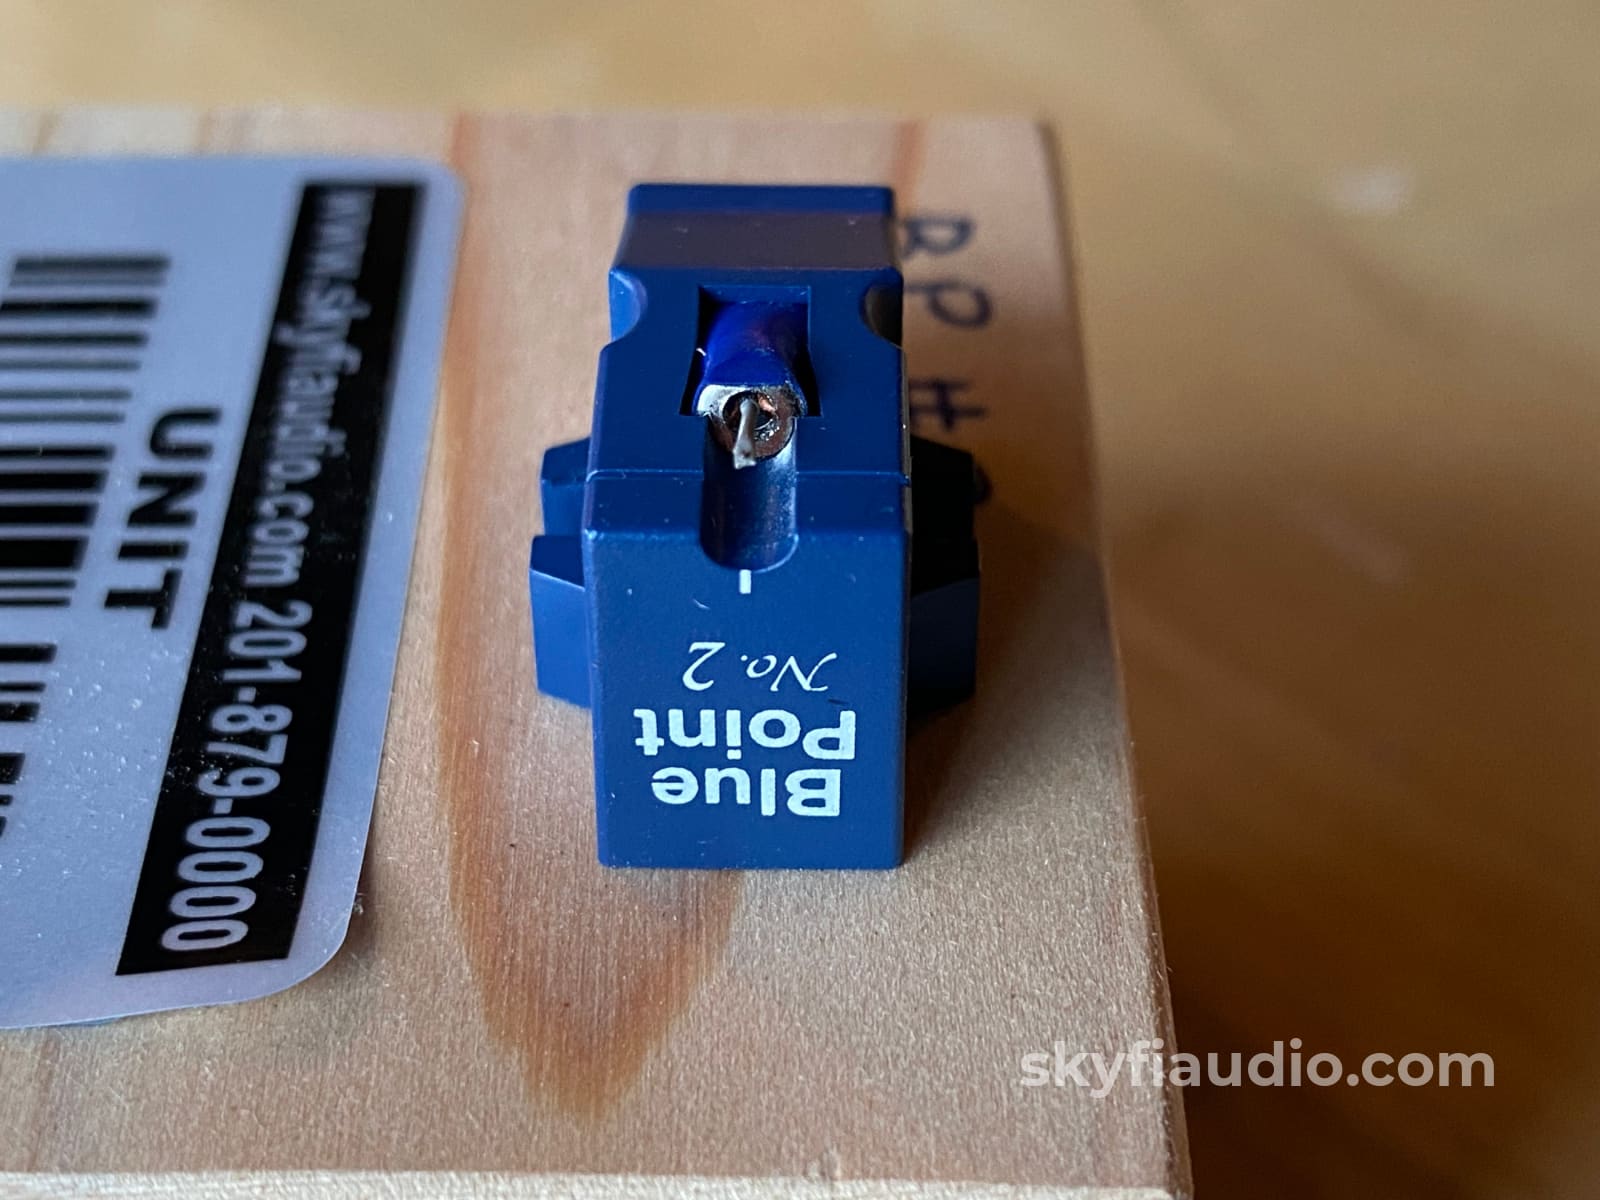 Sumiko Blue Point No. 2 Mc (Moving-Coil) Cartridge Lightly Used Phono